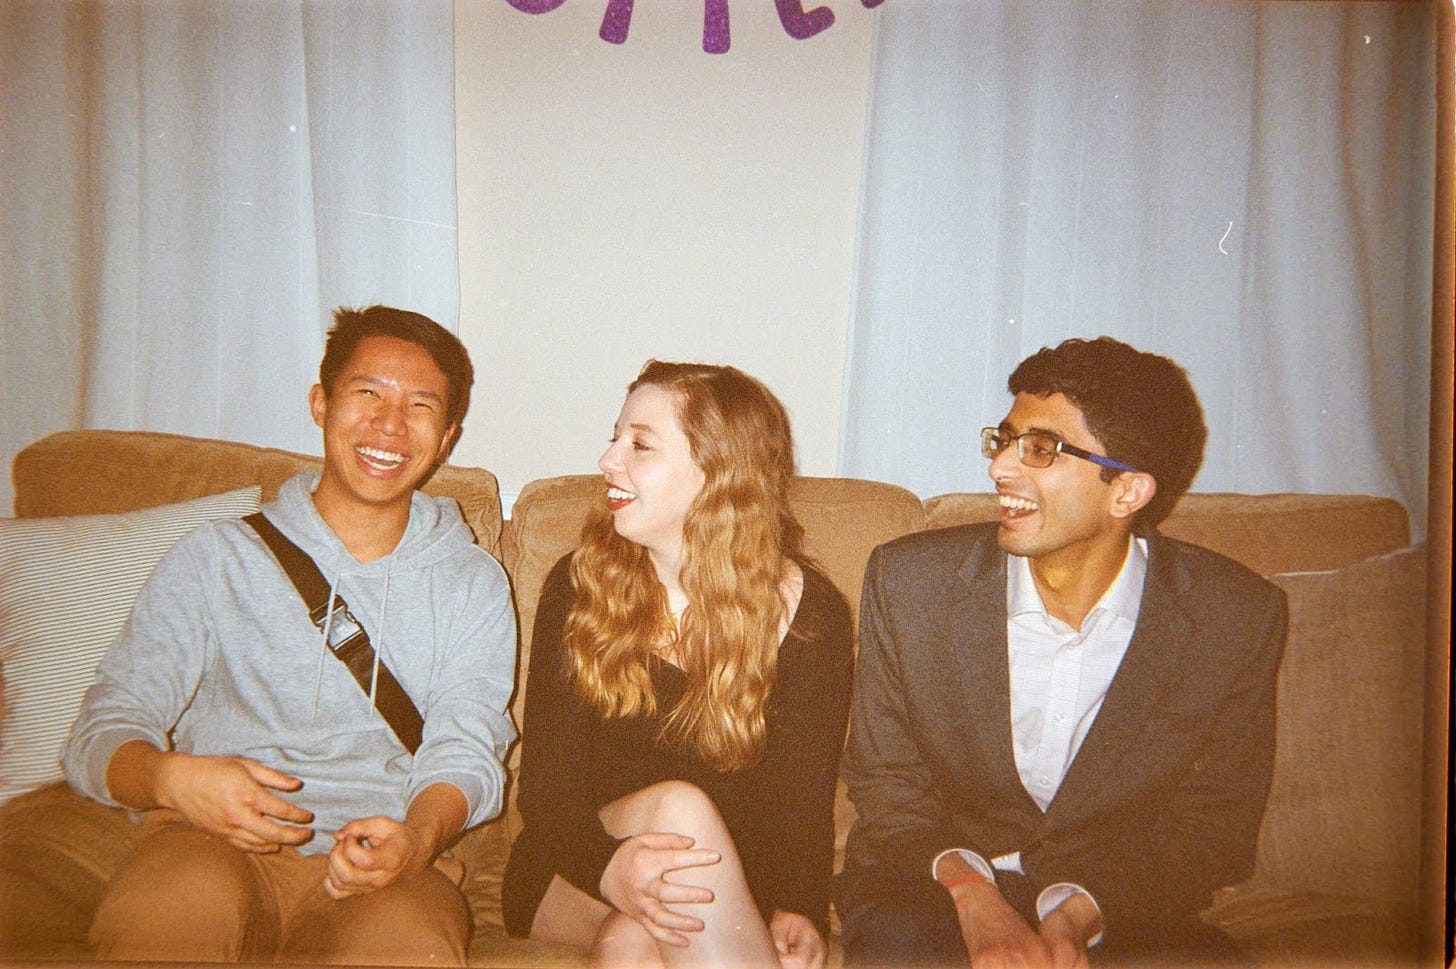 Charles, Eliza, and Ashwin (left-to-right) seated laughing on a couch. Vintage style photo